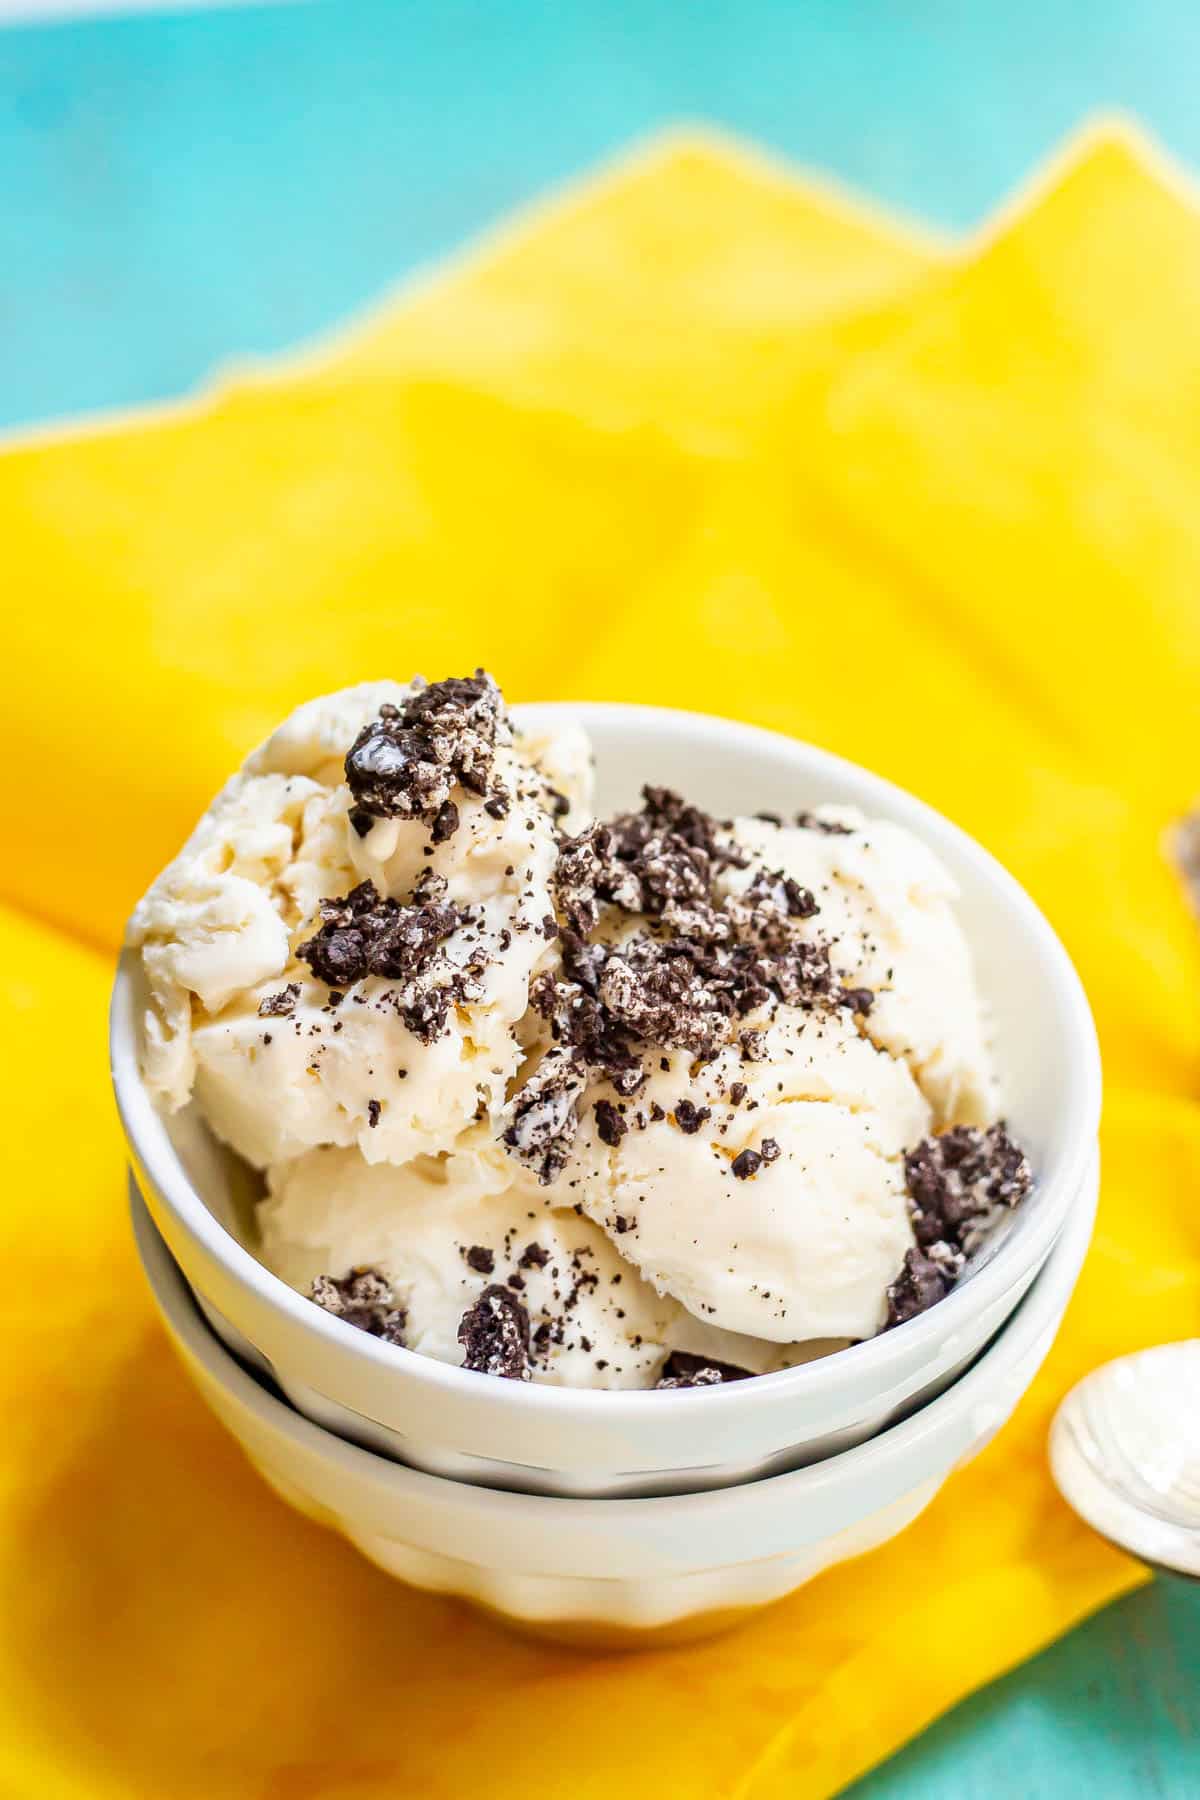 Vanilla ice cream topped with crushed Oreo cookie pieces served in a stacked white bowl on a yellow fabric with spoons nearby.